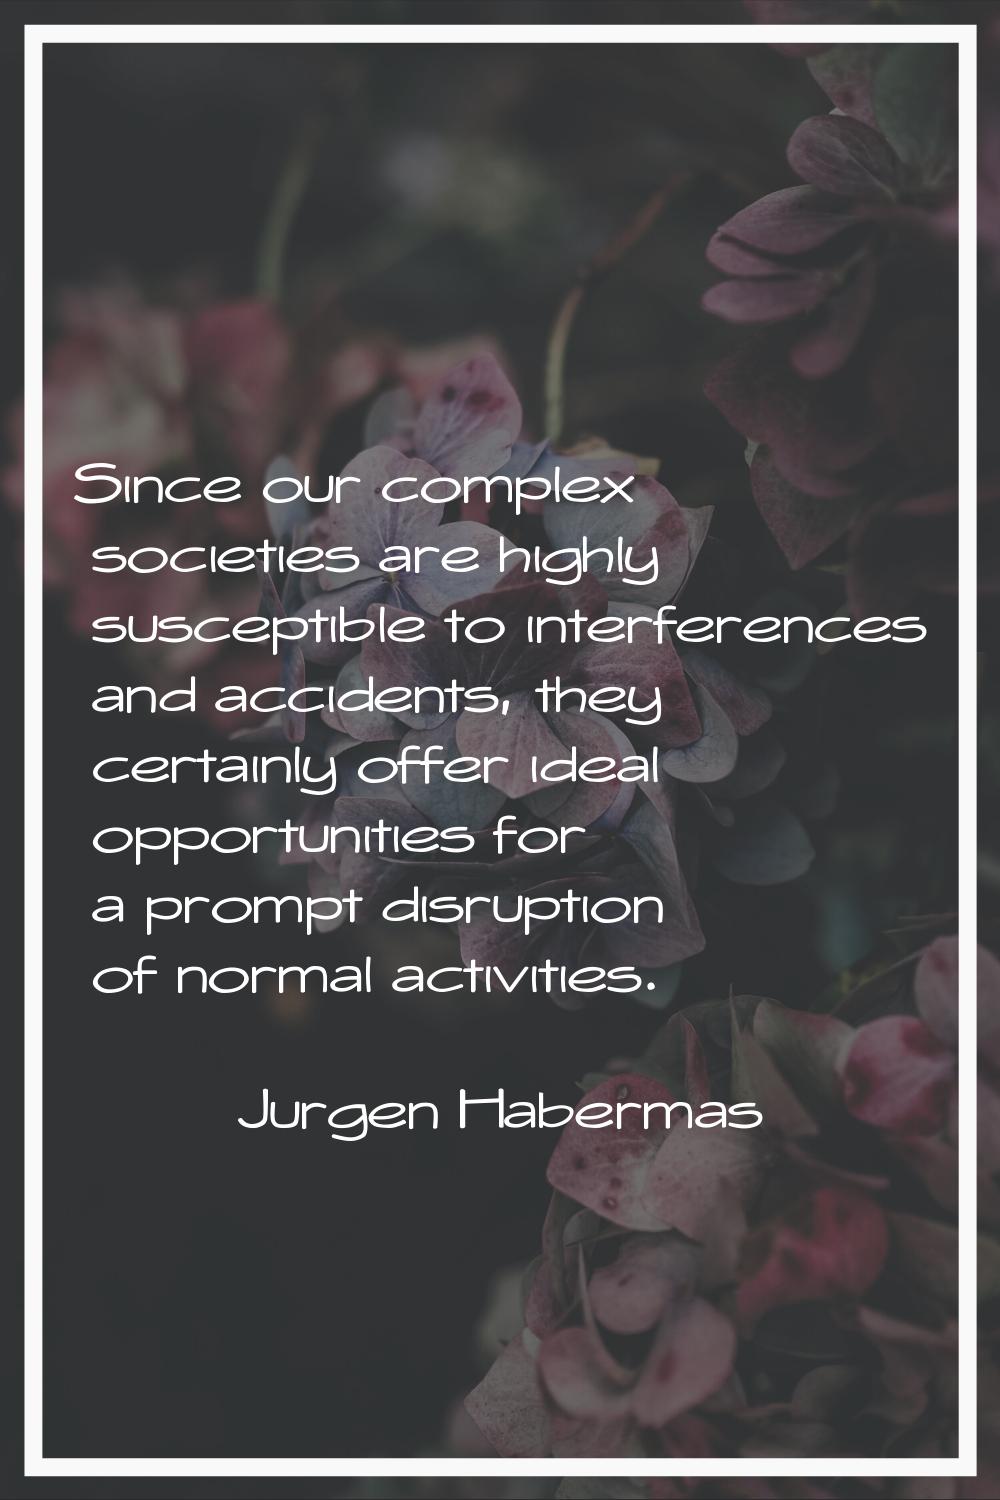 Since our complex societies are highly susceptible to interferences and accidents, they certainly o